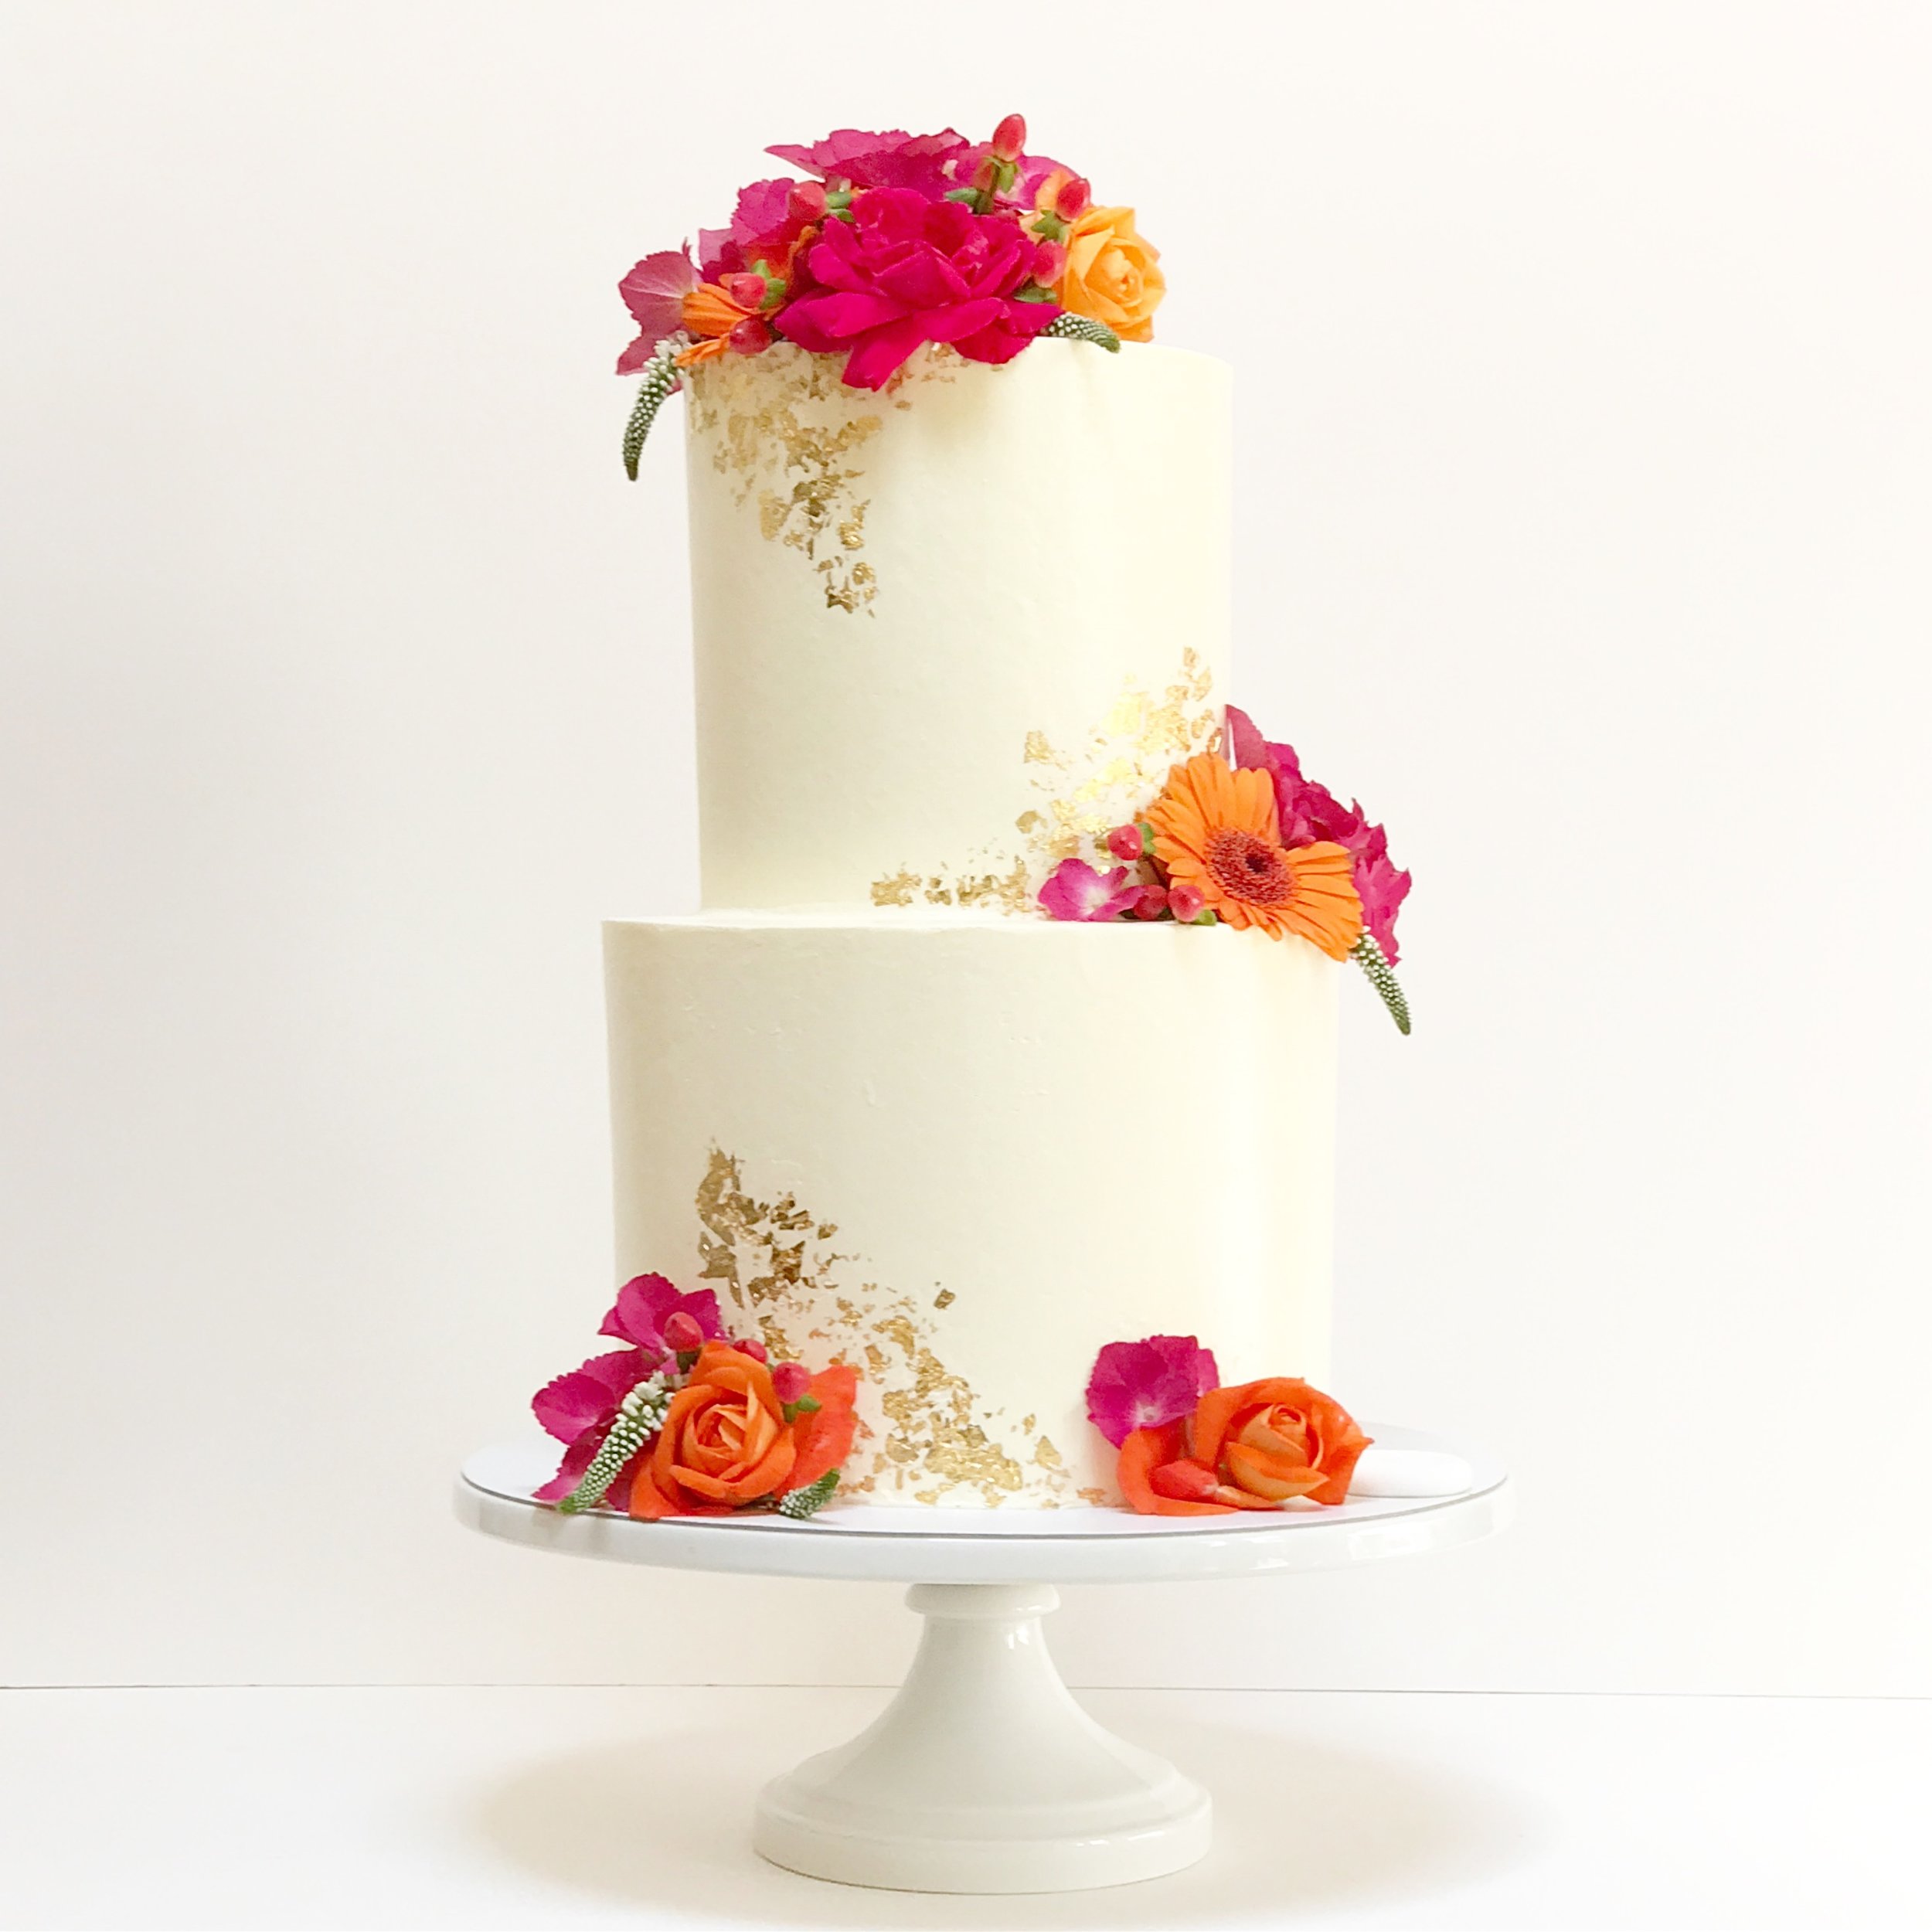 Gallery — Gaya'S Cakes & Confections